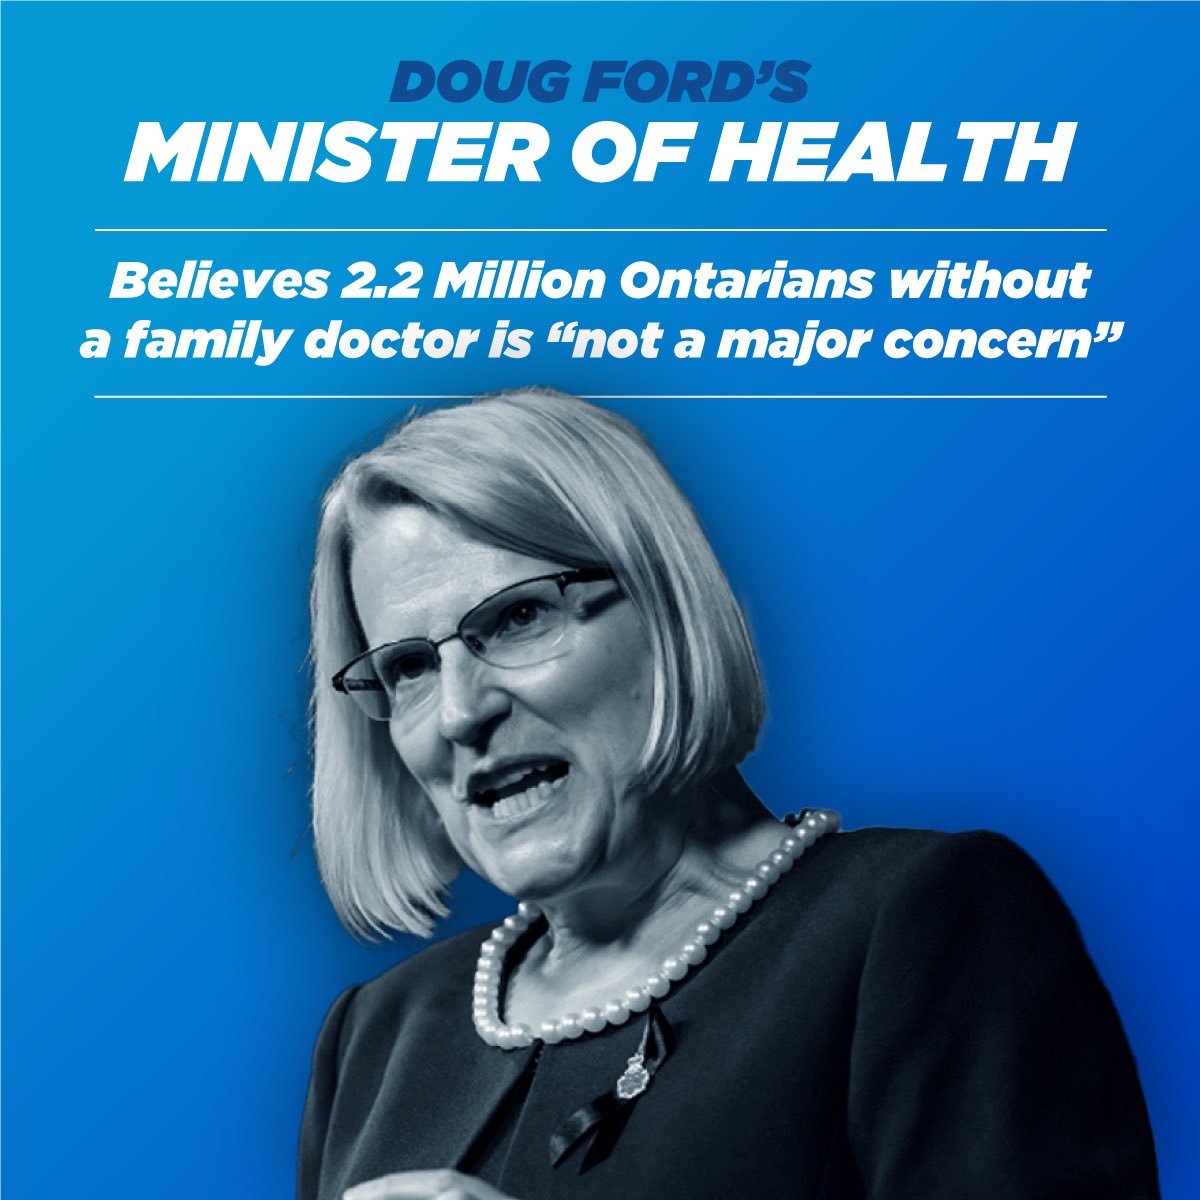 After six years of Ford’s Conservatives, over 2.2 million Ontarians are without a family doctor. But Doug Ford's Minister of Health doesn't care. She'd rather put money in the pockets of her wealthy friends than fund our healthcare system. #onpoli